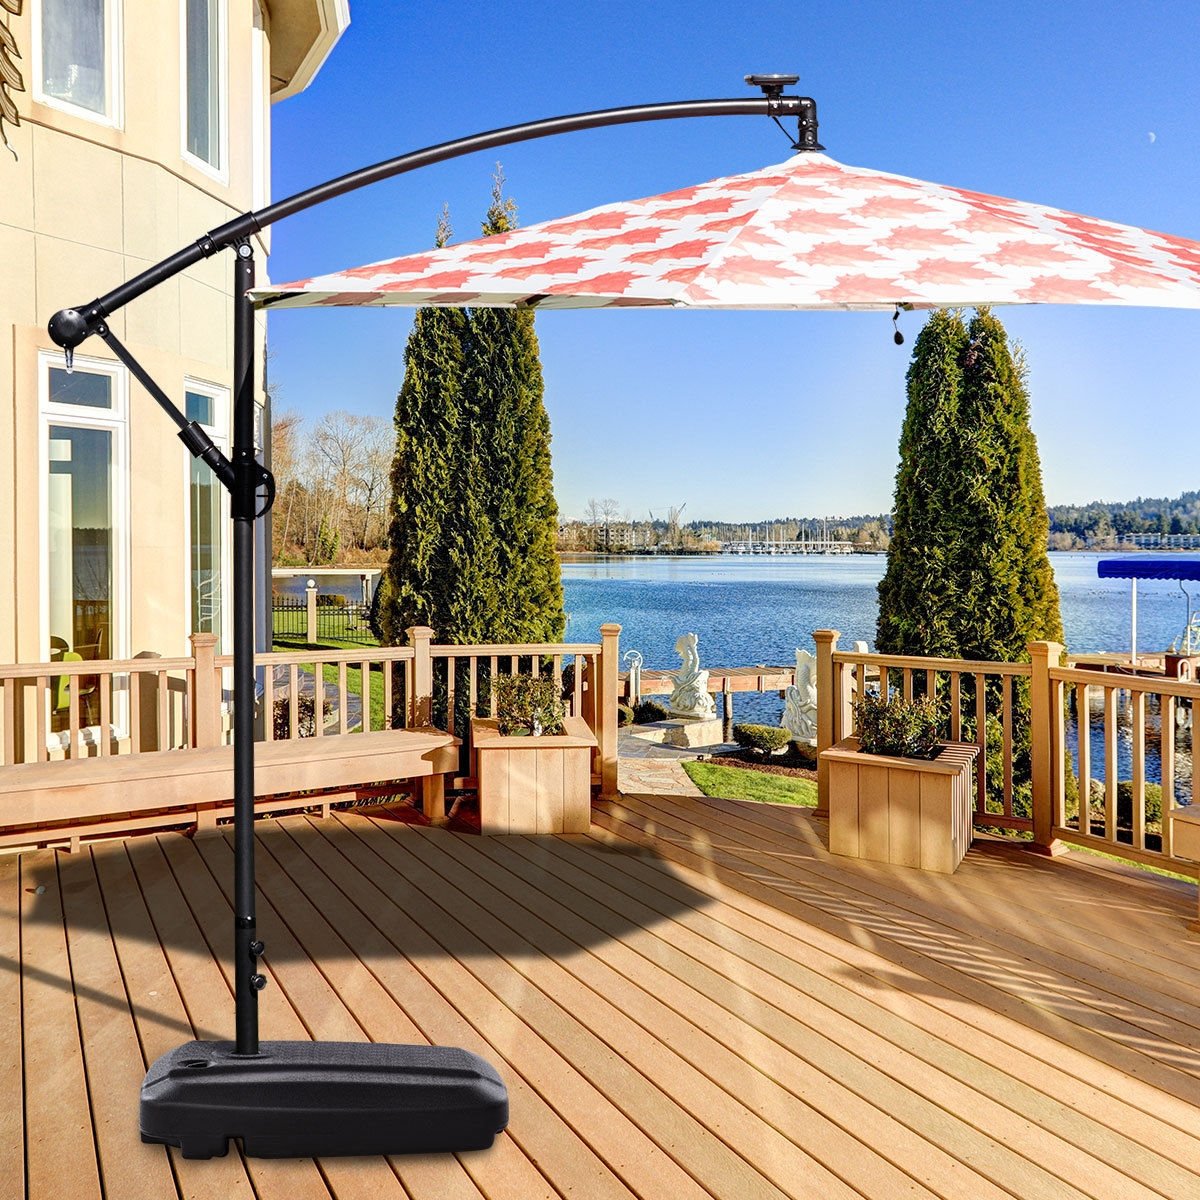 60L Plastic Weighted Fill Water Sand Wheel Patio Umbrella Base, Black - Gallery Canada